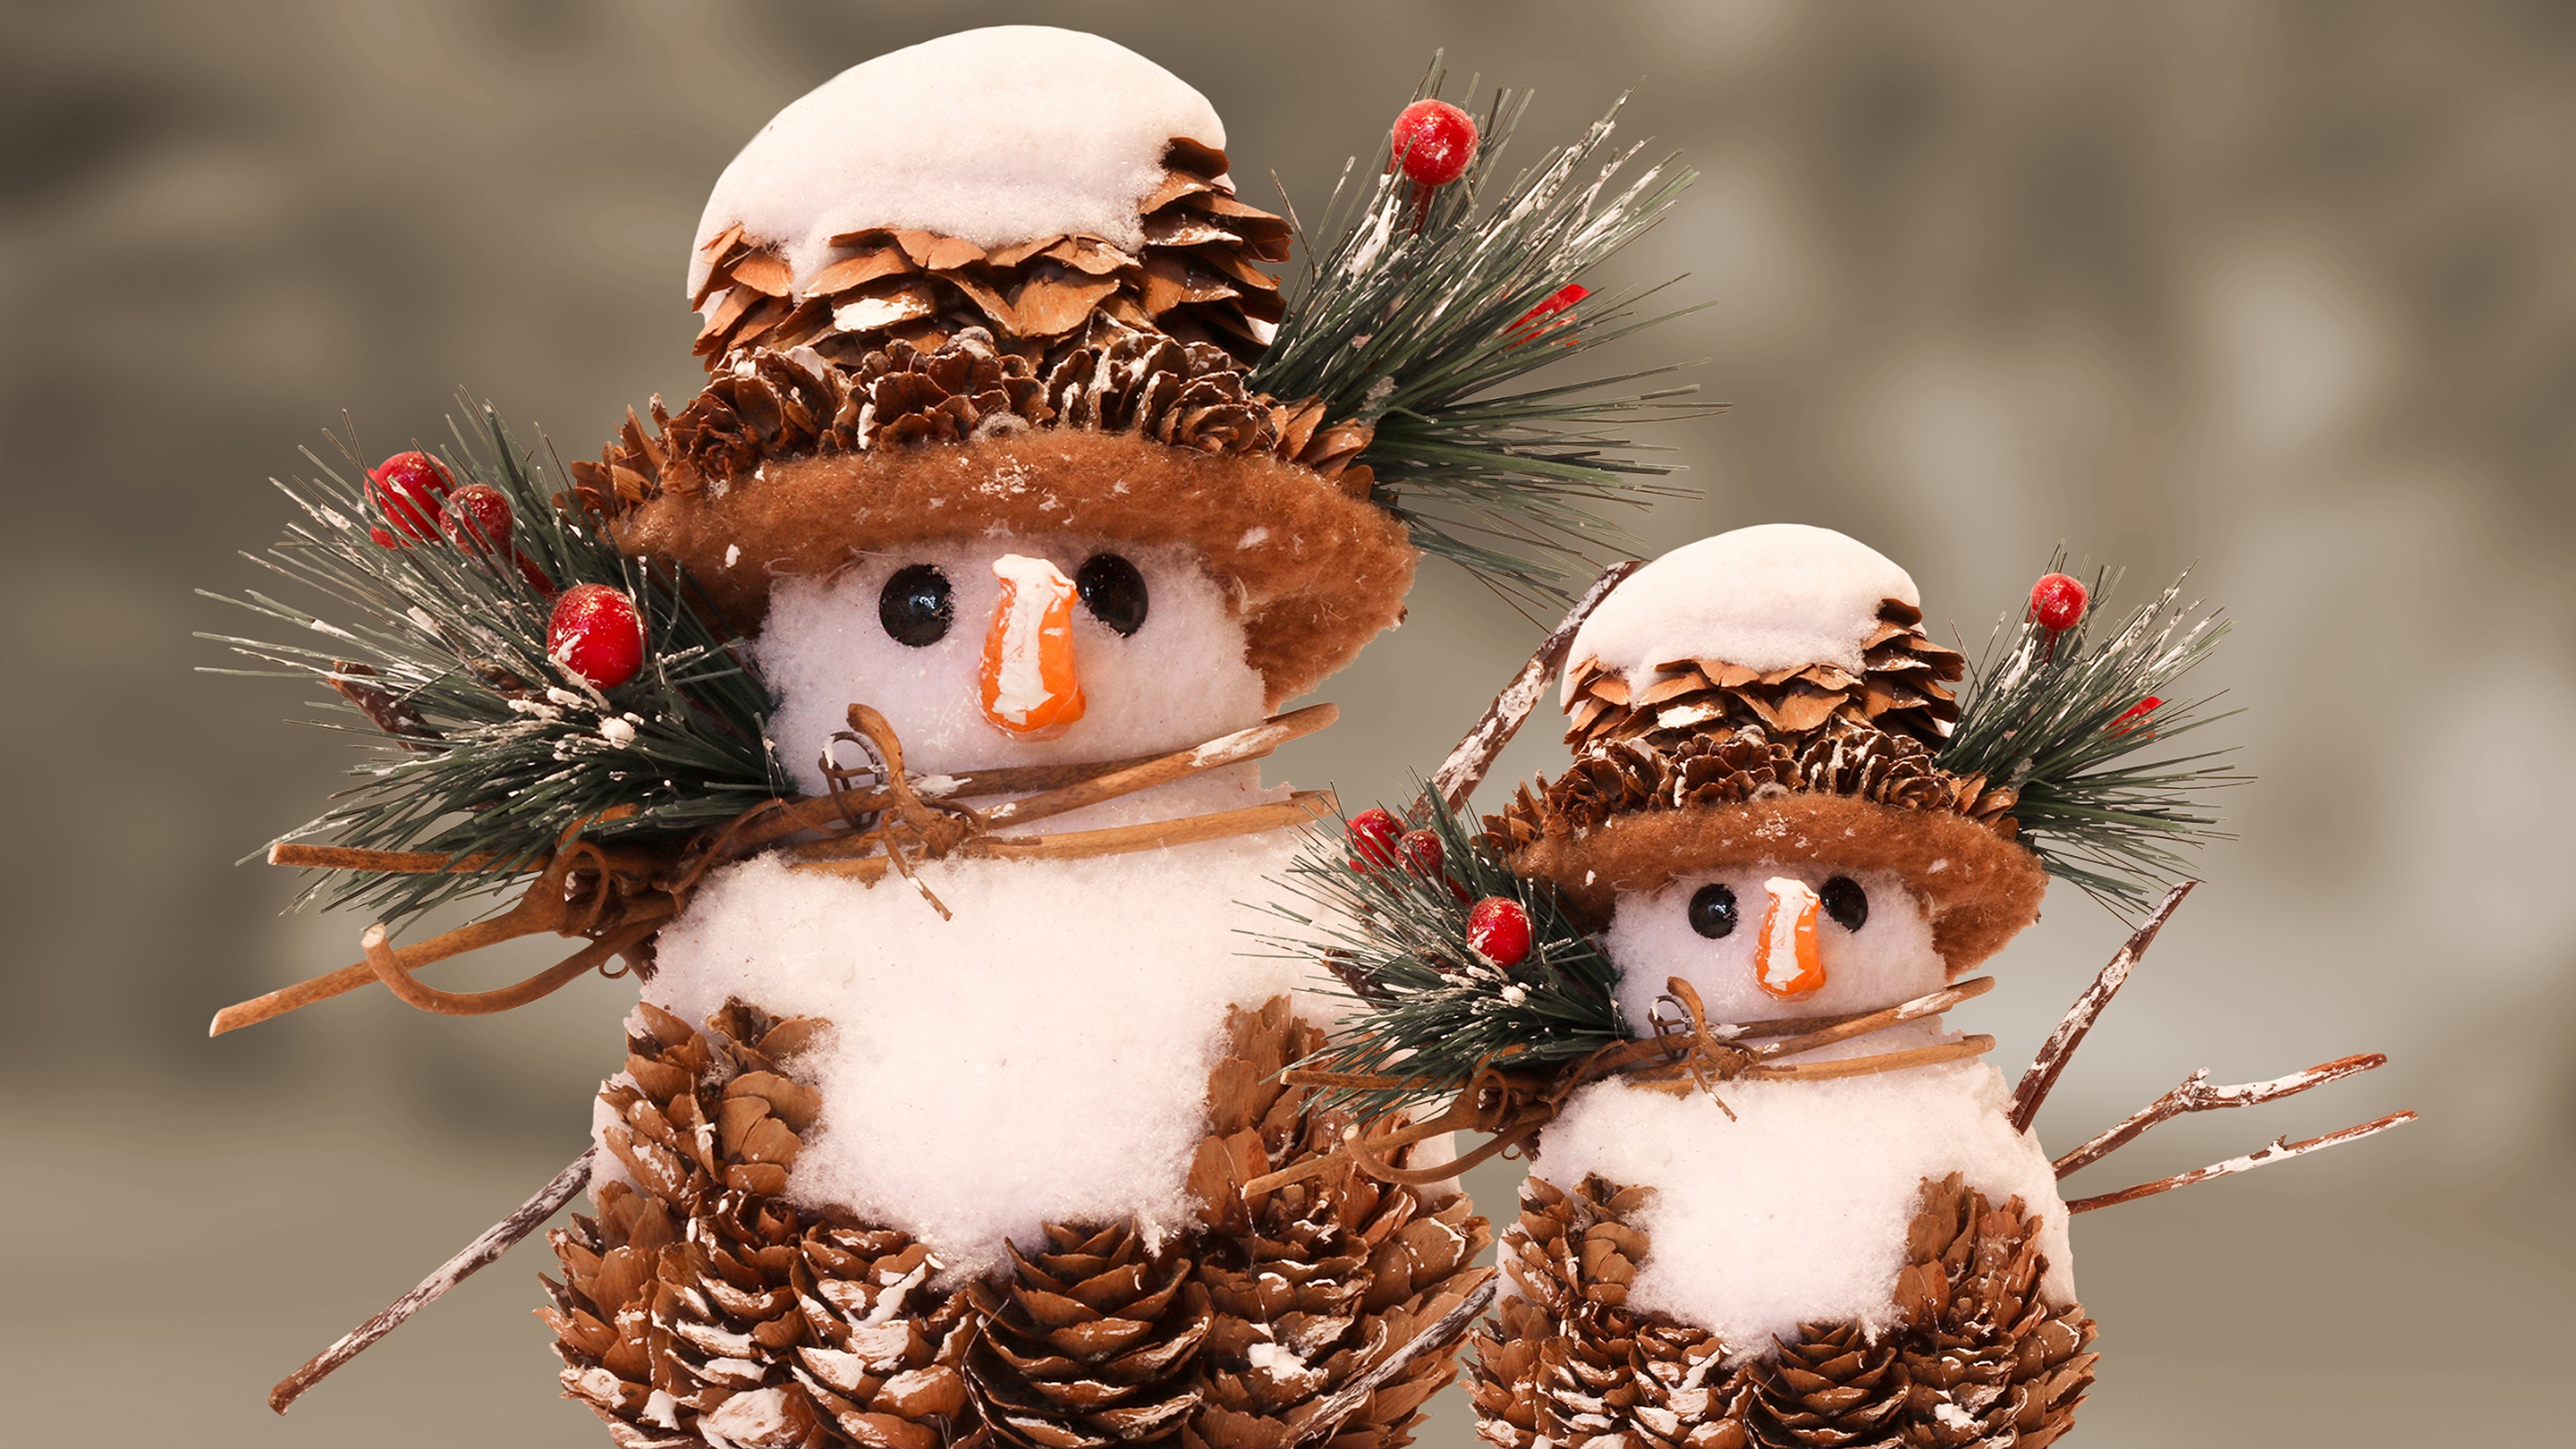 Photography Snowman HD Wallpaper | Background Image